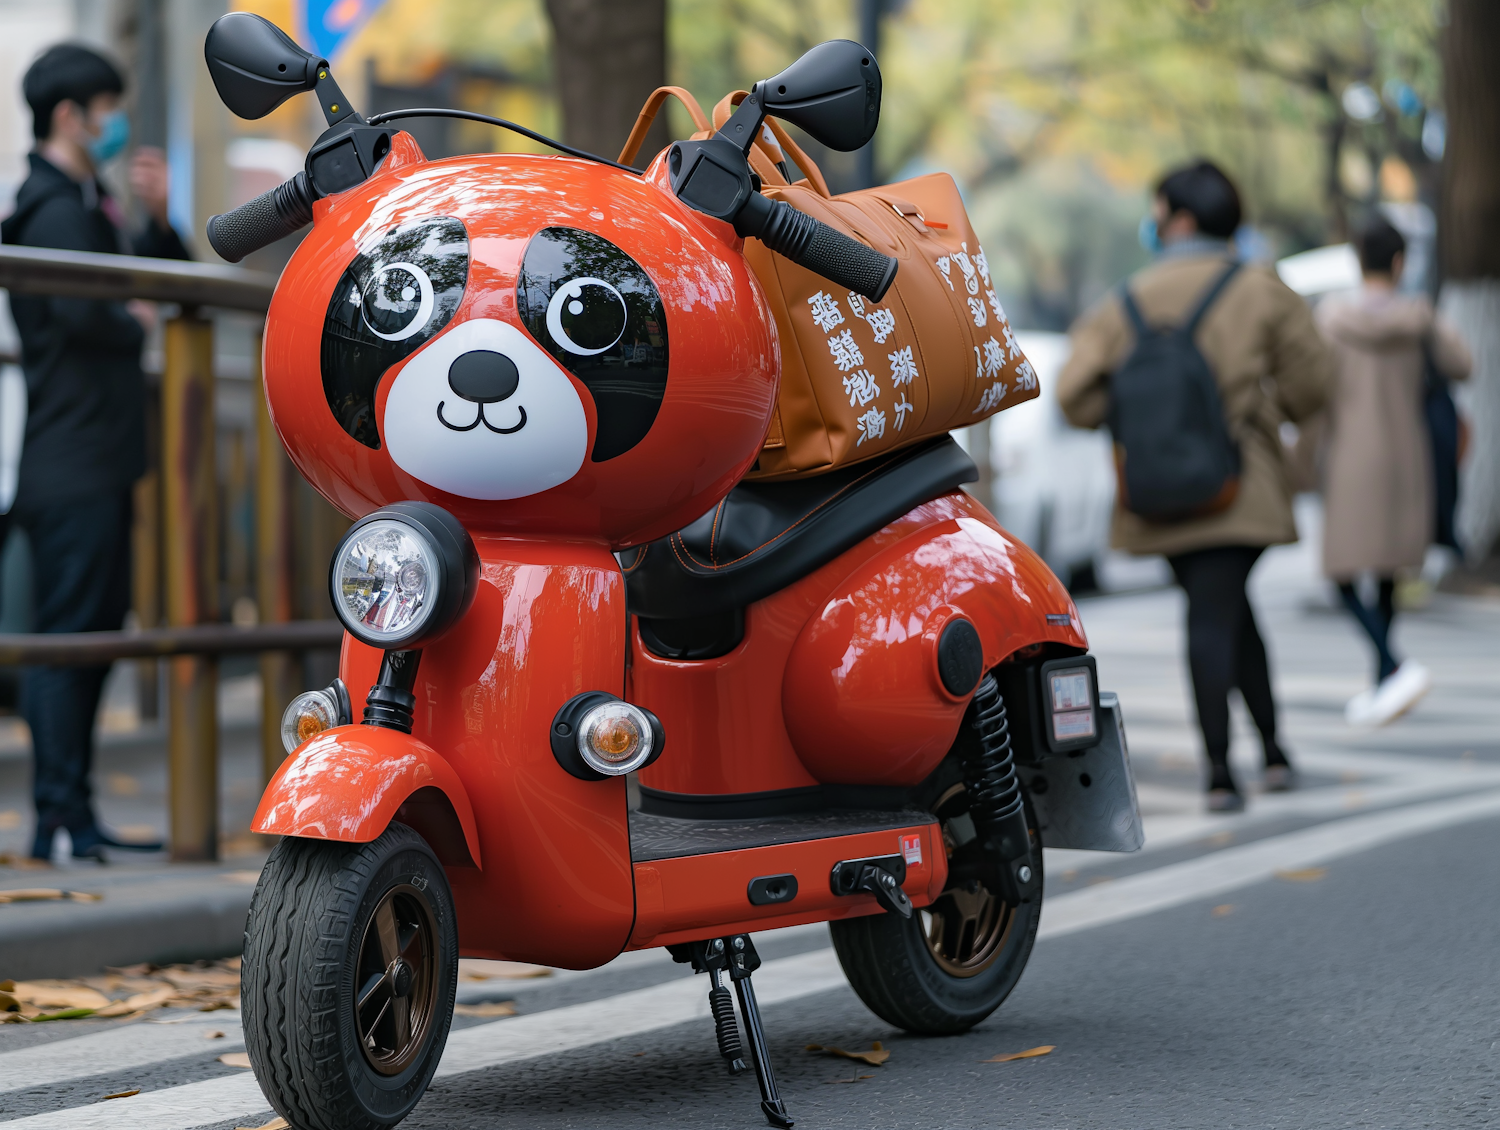 Panda-Styled Red Scooter in Urban Setting